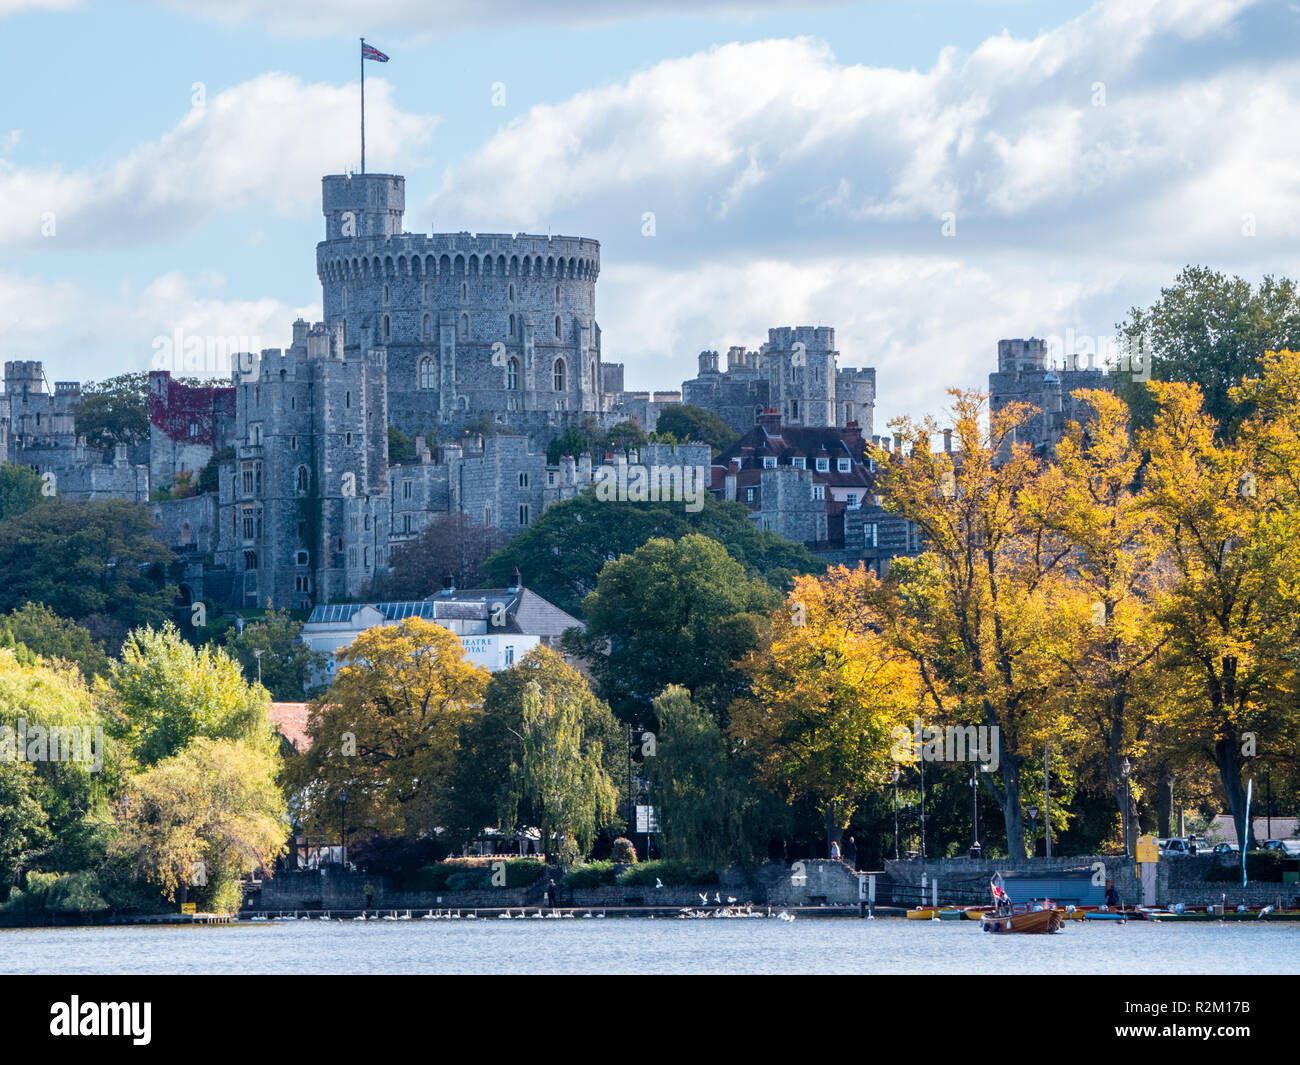 Small Launch with Union Jack Flag, View of Windsor Castle Across River Thames with Autumn Trees, Windsor, Berkshire, England, UK, GB. Stock Photo